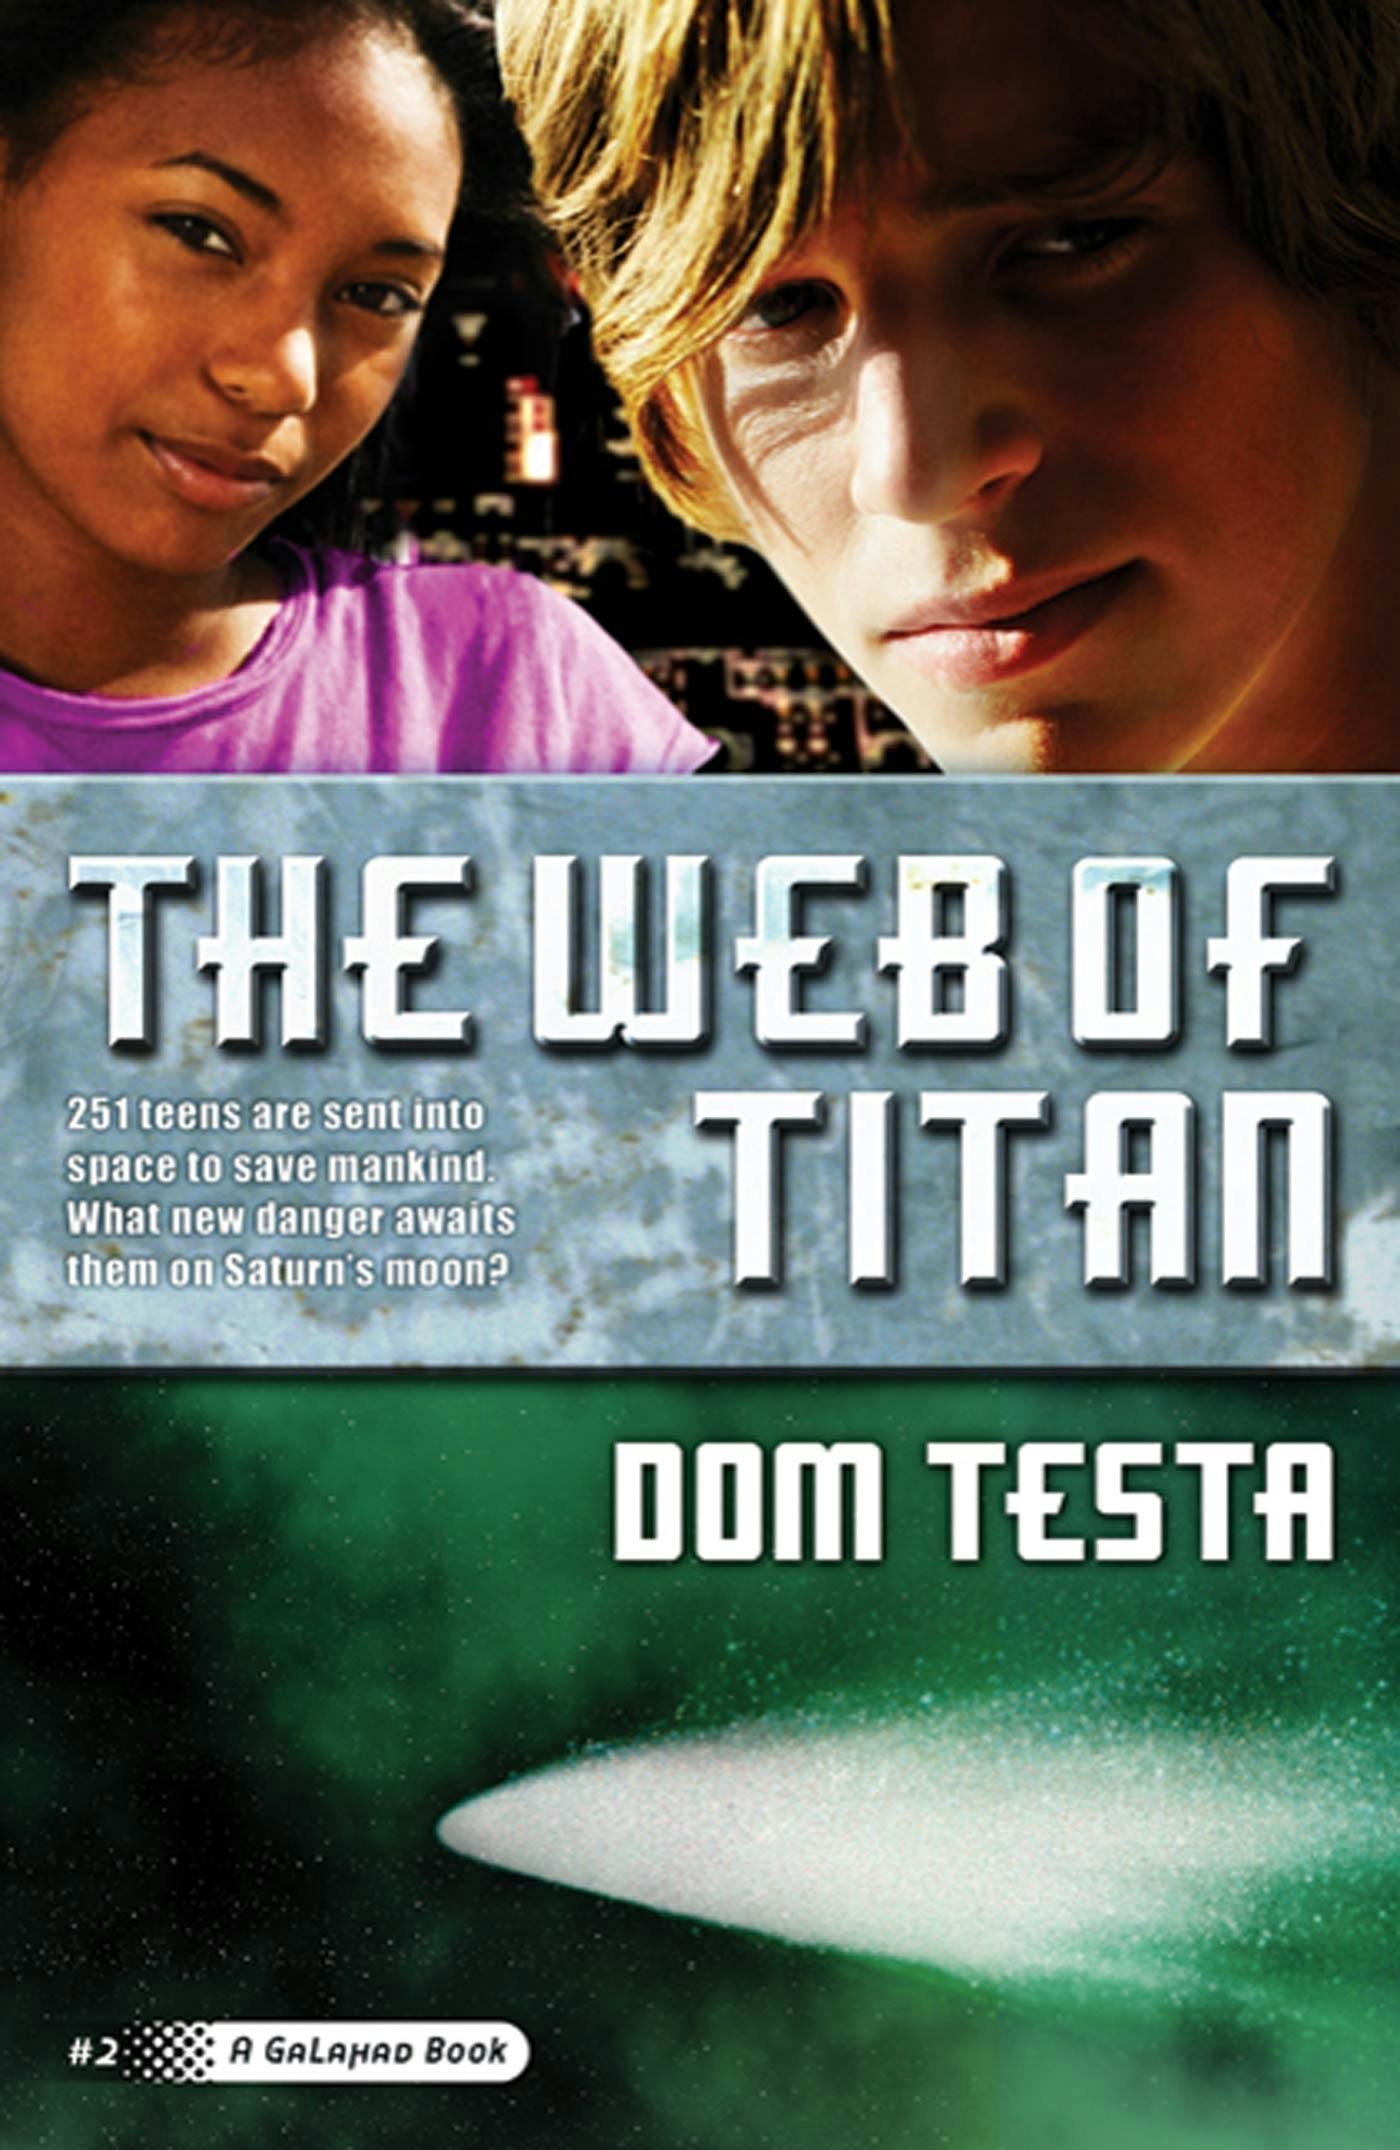 Cover for the book titled as: The Web of Titan